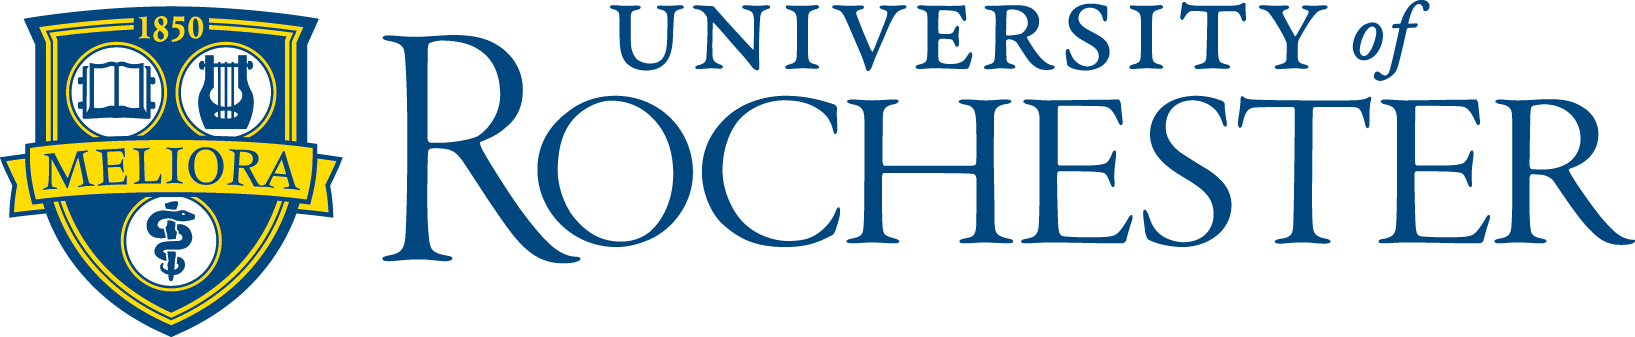 Rochester Logo - Symbols :: About Us :: University of Rochester